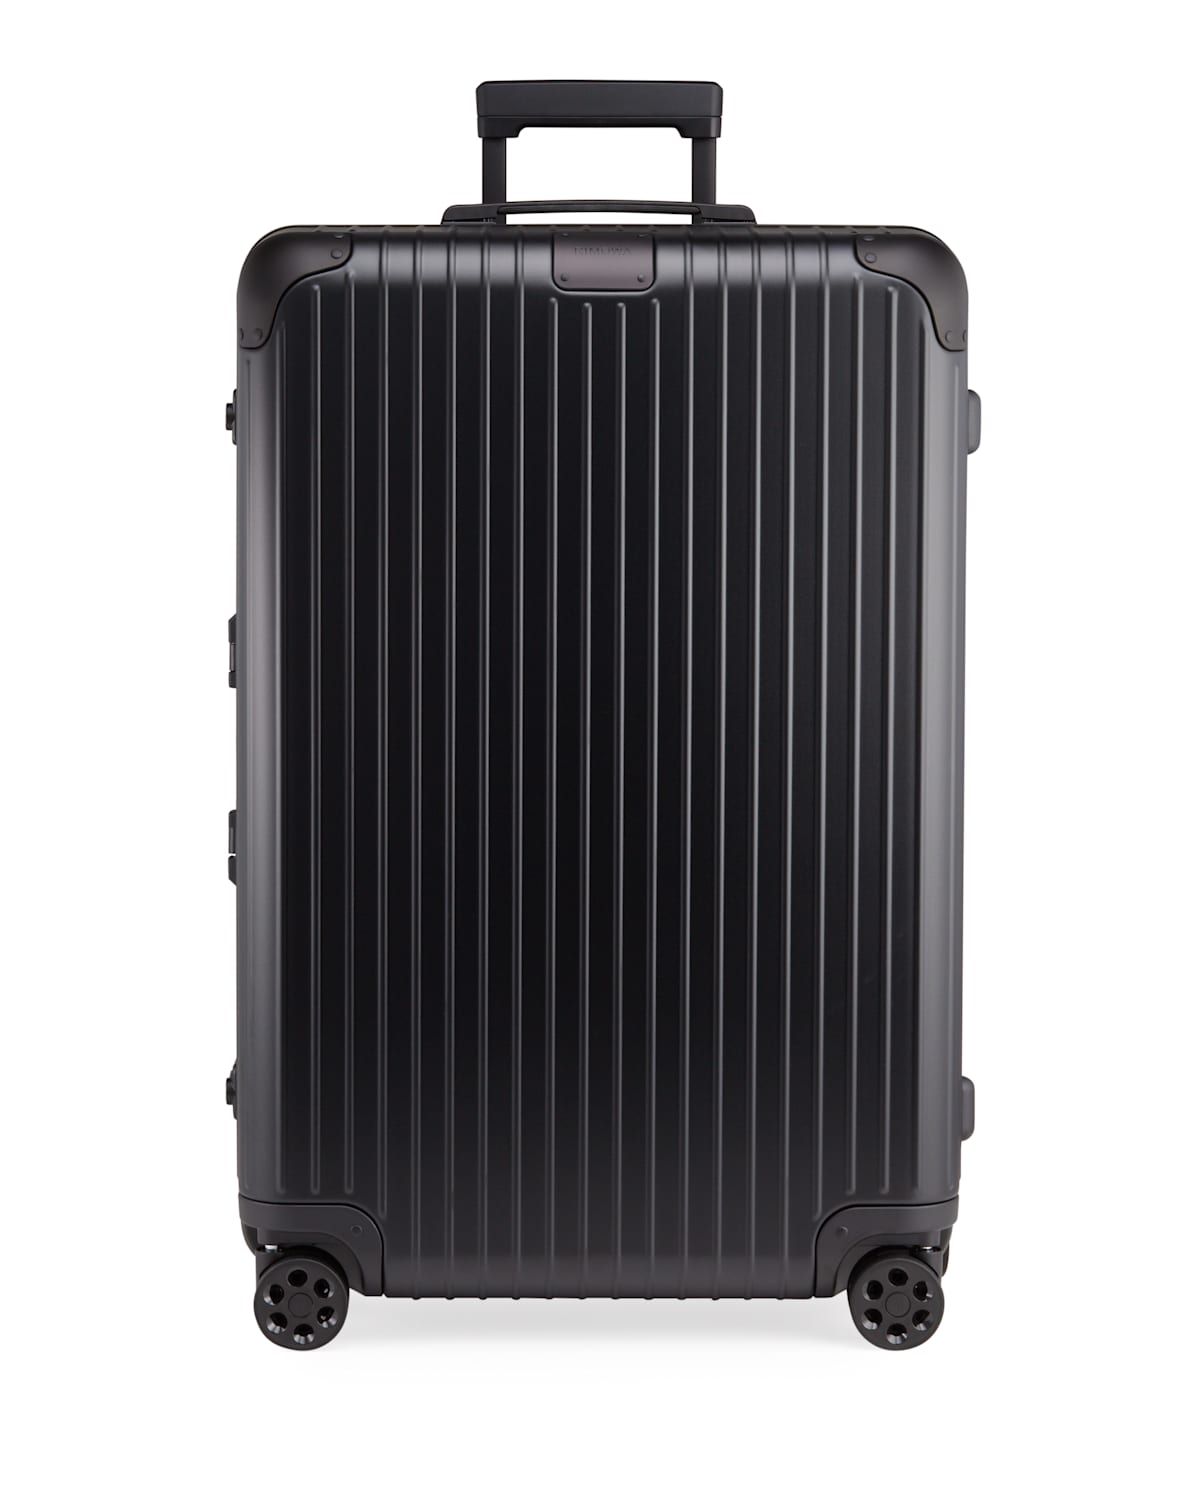 Hybrid 73 Check-In L Luggage